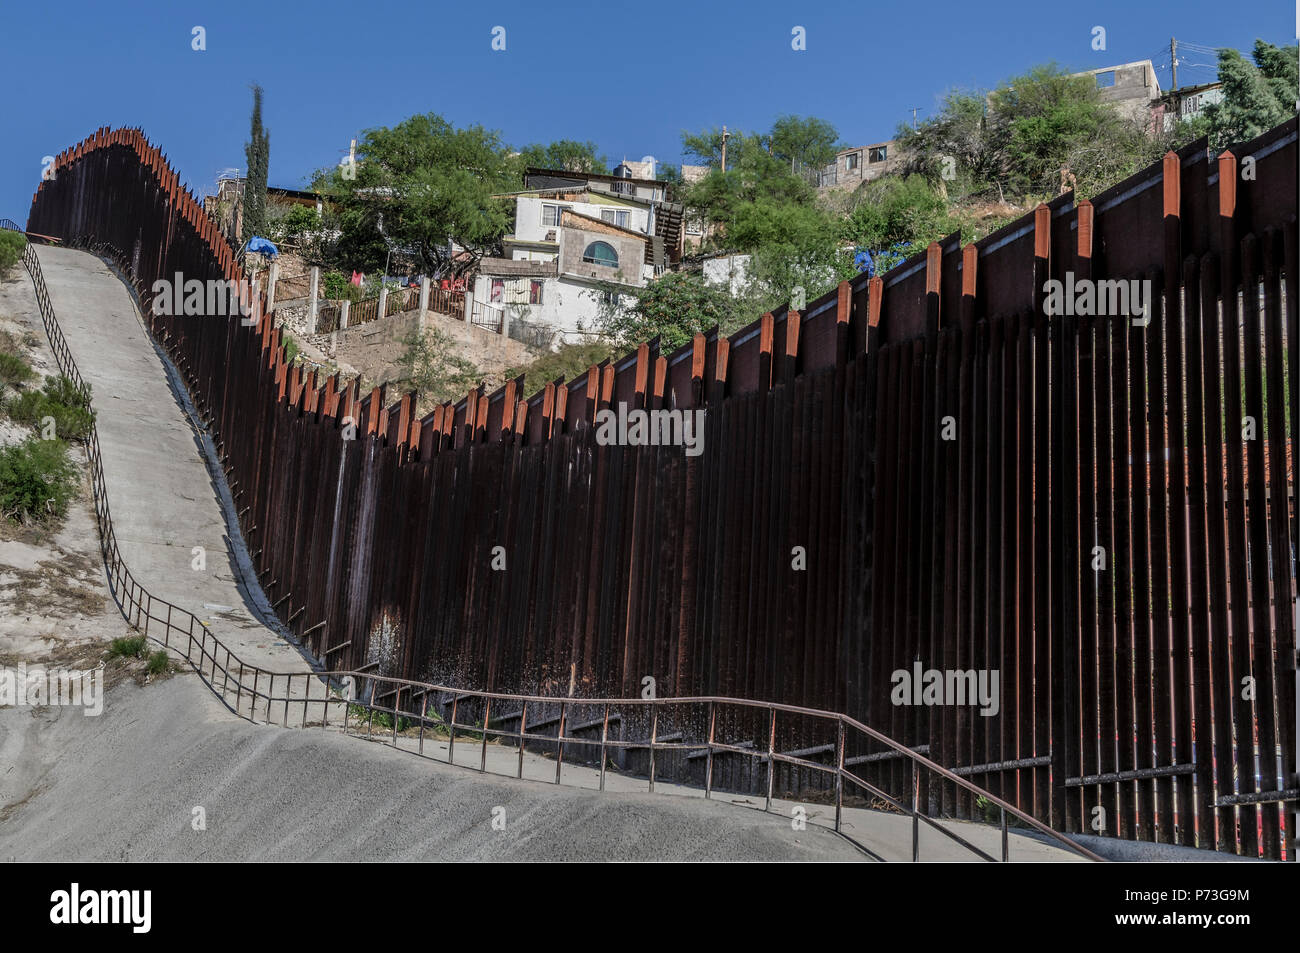 United States Border Fence, viewed from US side showing Nogales Mexico., looking east from near port of entry in downtown Nogales AZ, April 12, 2018 Stock Photo